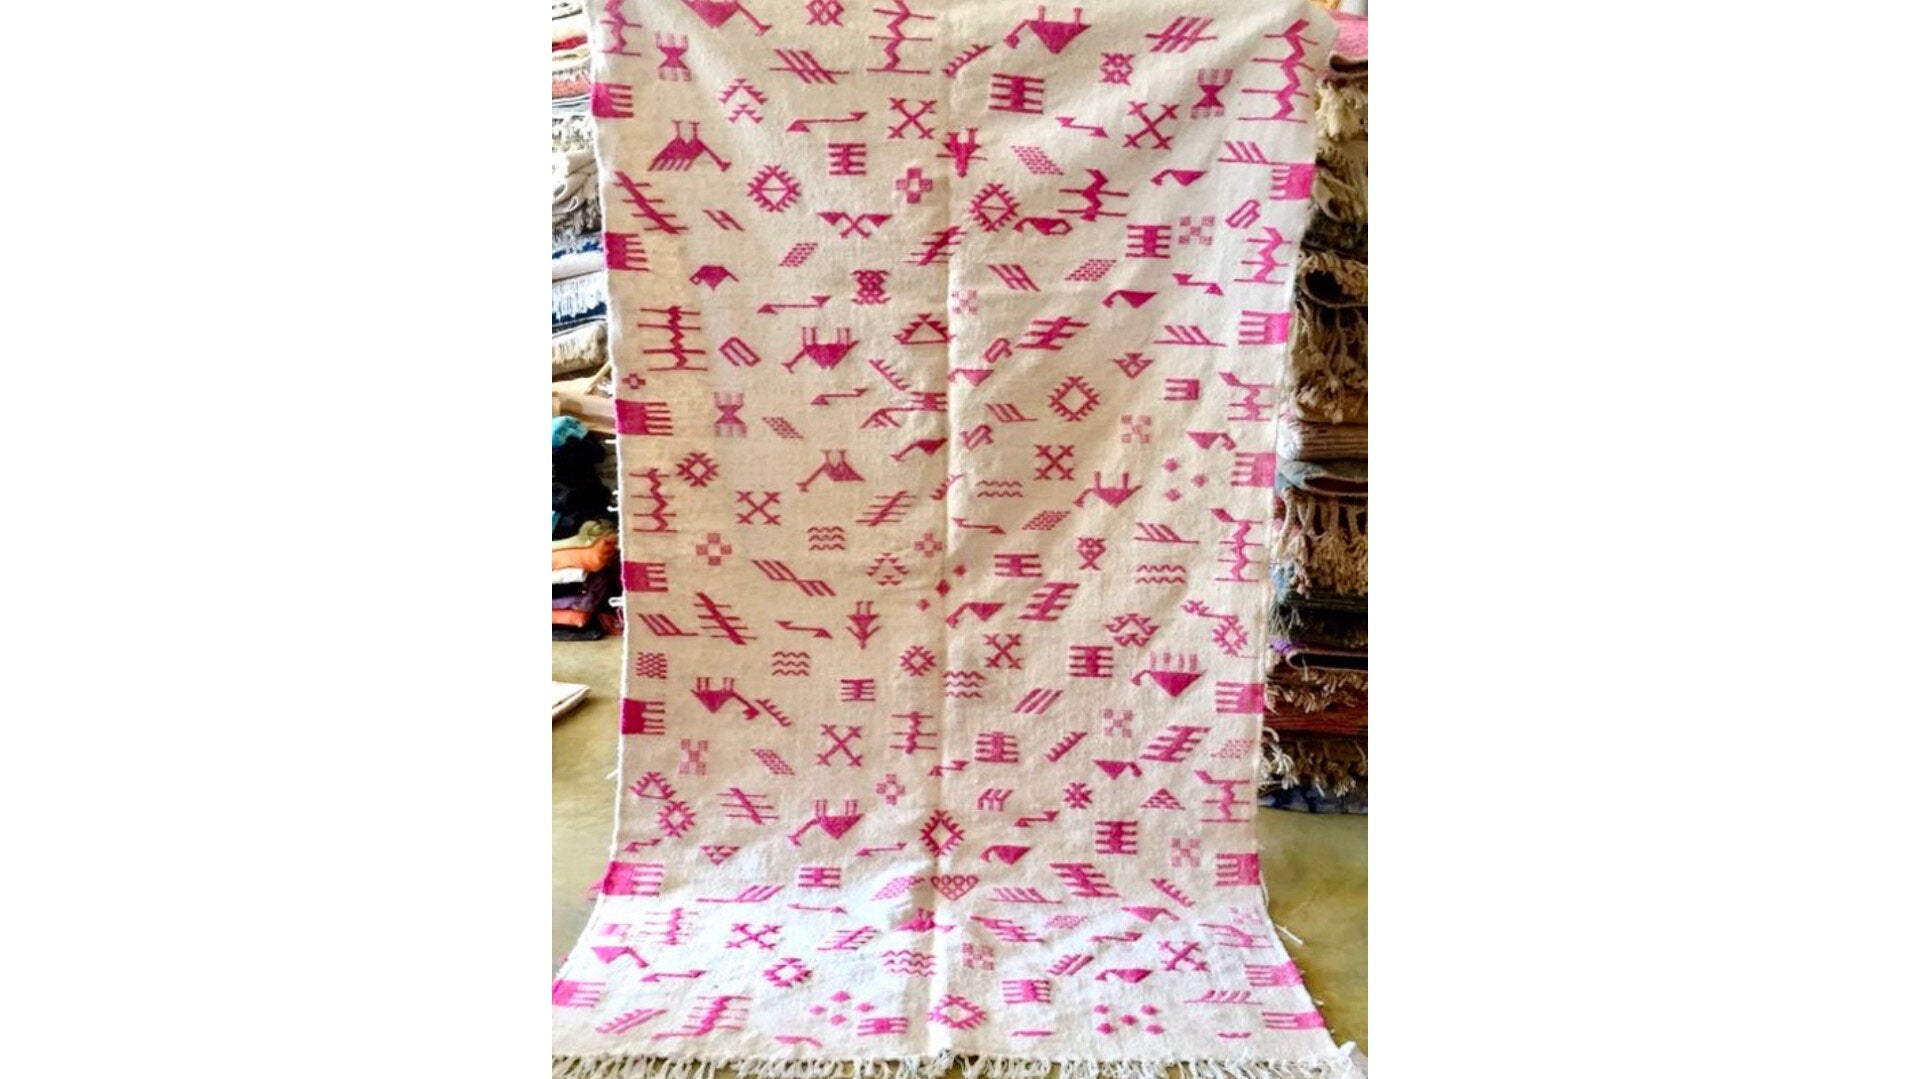 White Pink Kilim Rug that used for our customized Fluffikon wool dog beds / cats beds.